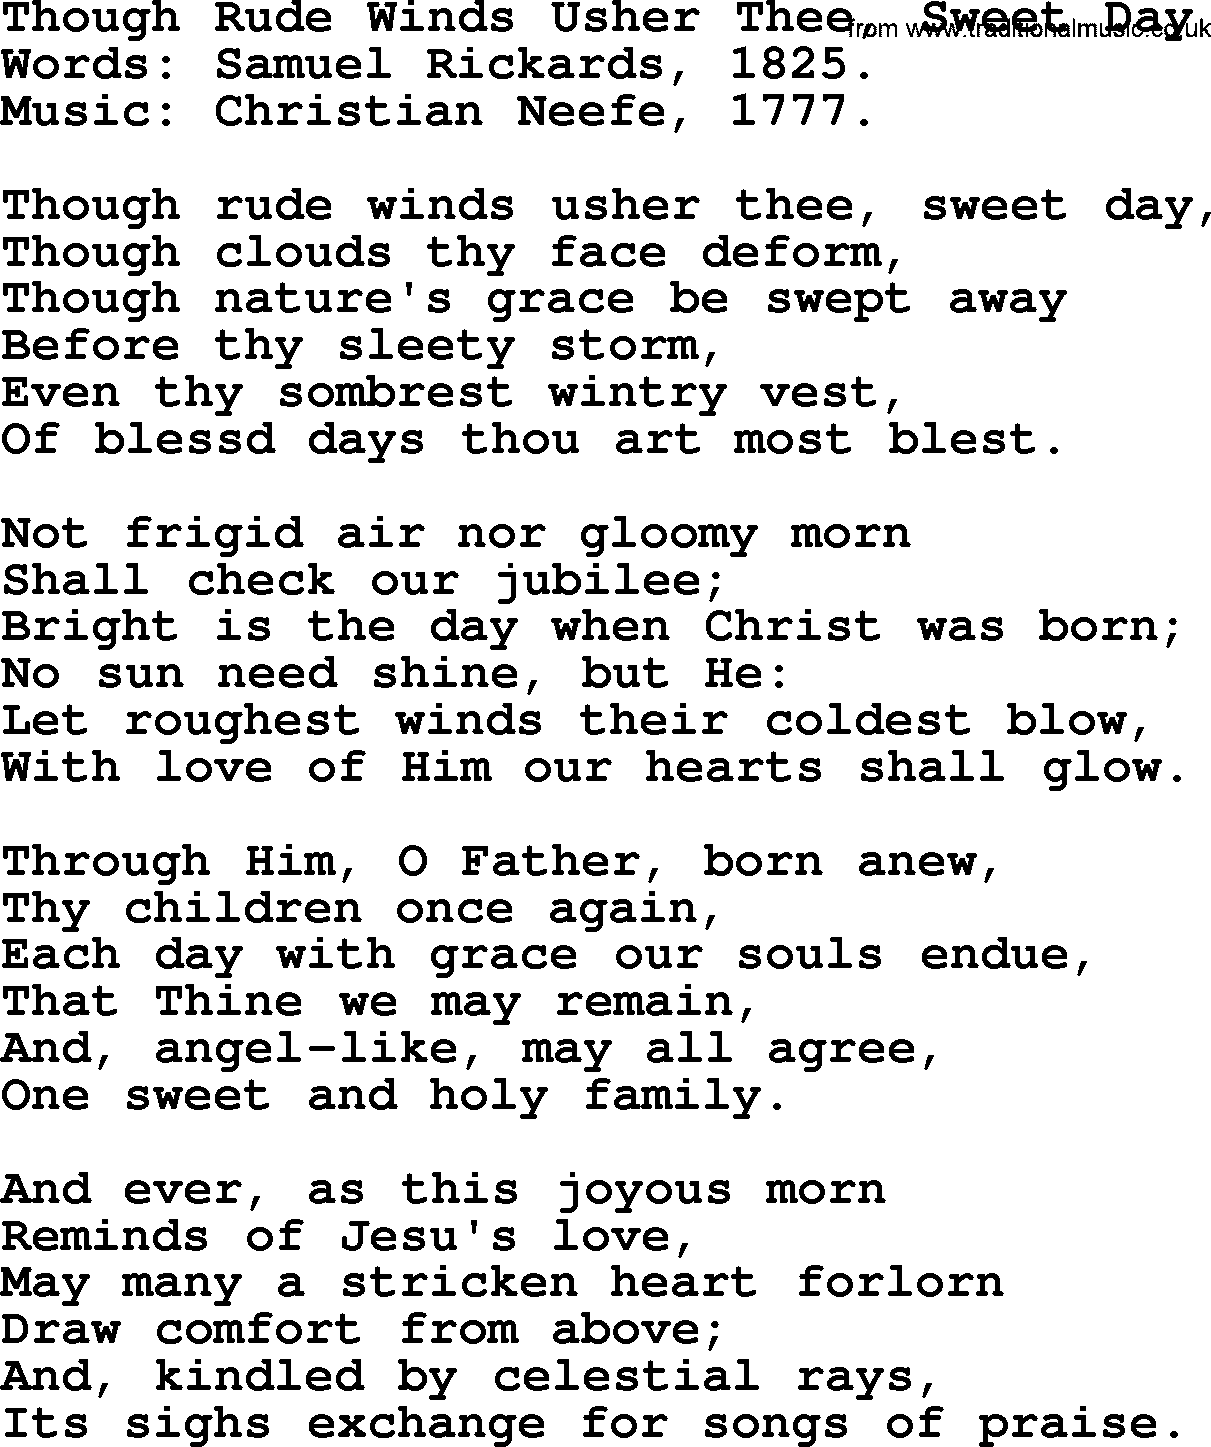 Christmas Hymns, Carols and Songs, title: Though Rude Winds Usher Thee, Sweet Day, lyrics with PDF